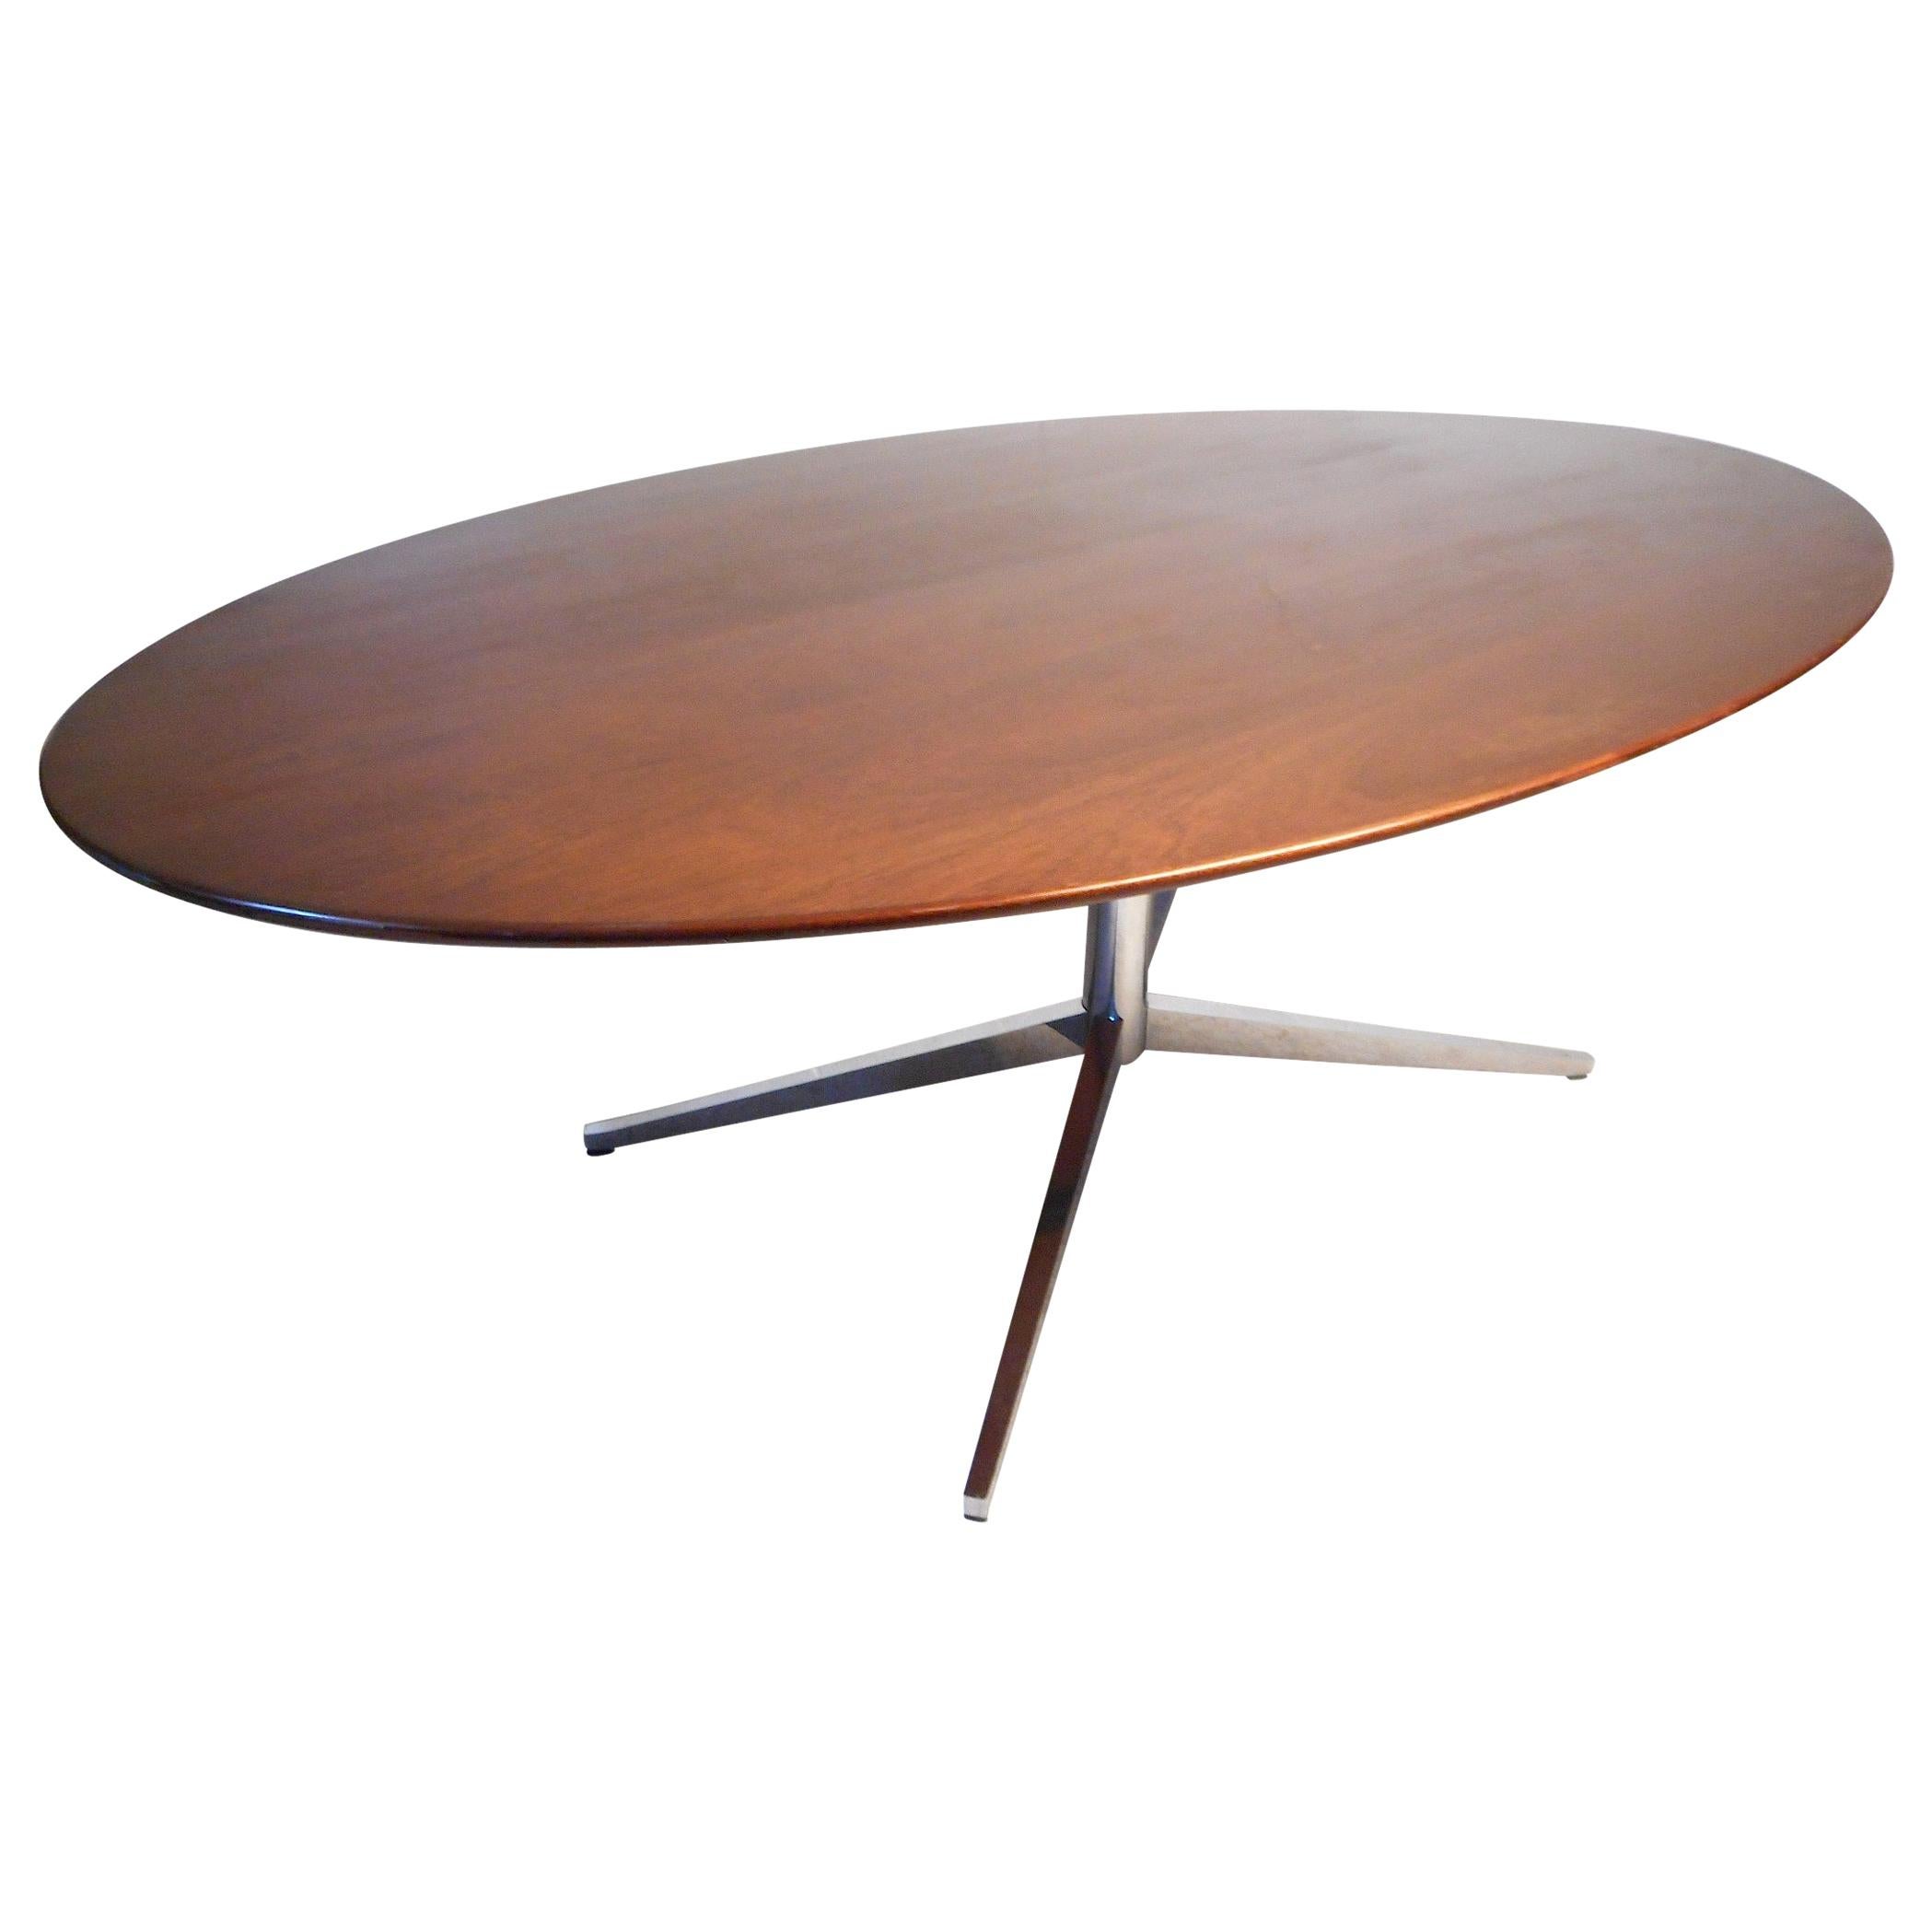 Midcentury Dining or Conference Table by Knoll